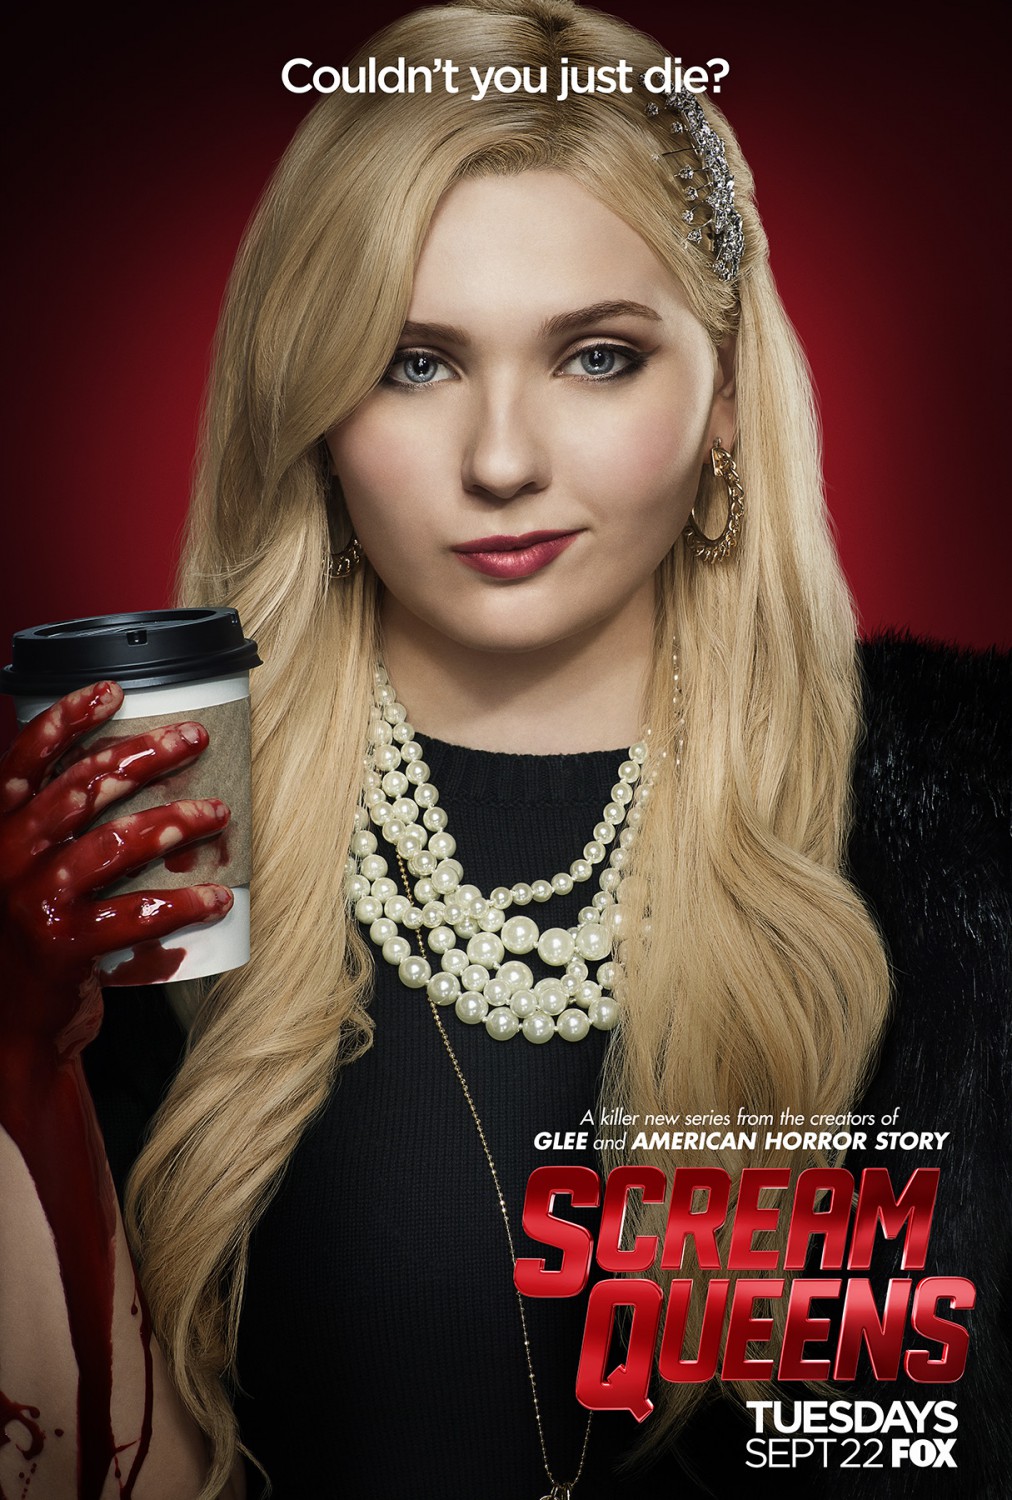 Extra Large TV Poster Image for Scream Queens (#5 of 20)